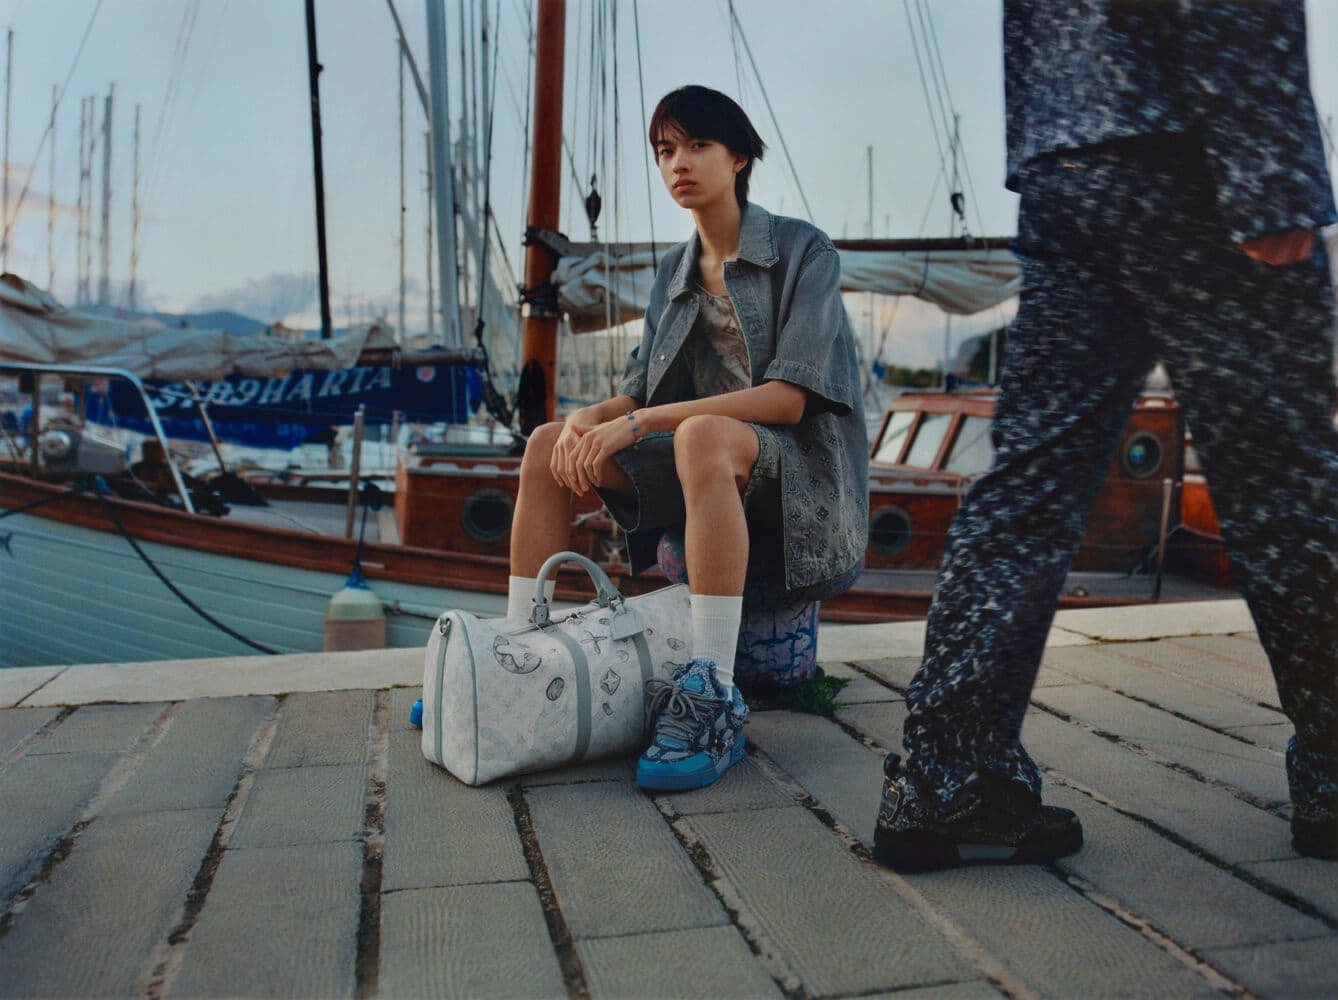 Louis Vuitton Pre-Fall 2023 Ad Campaign Review